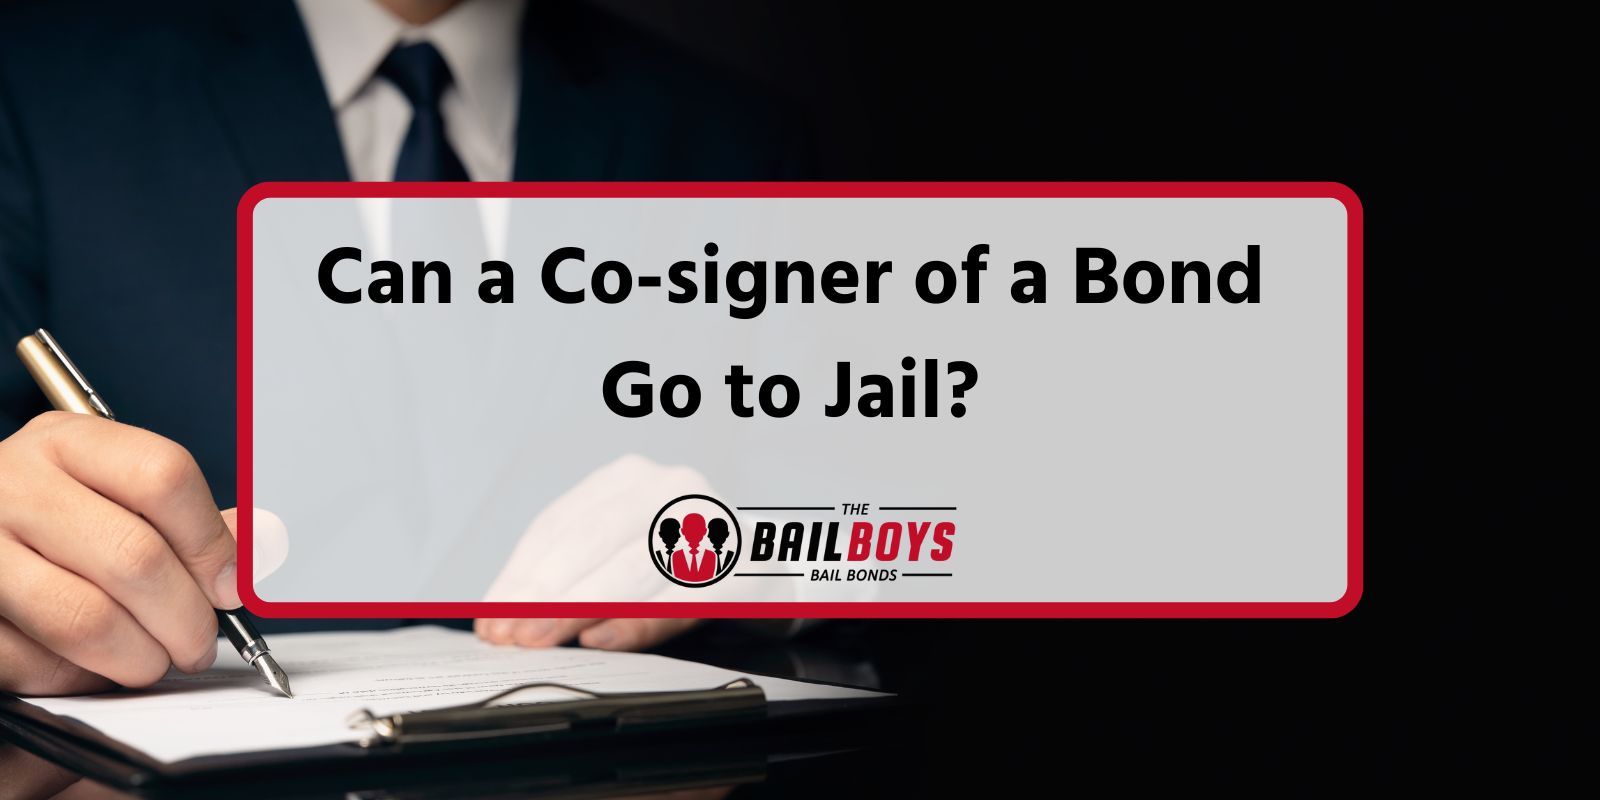 Can a Co-signer of a Bond Go to Jail?